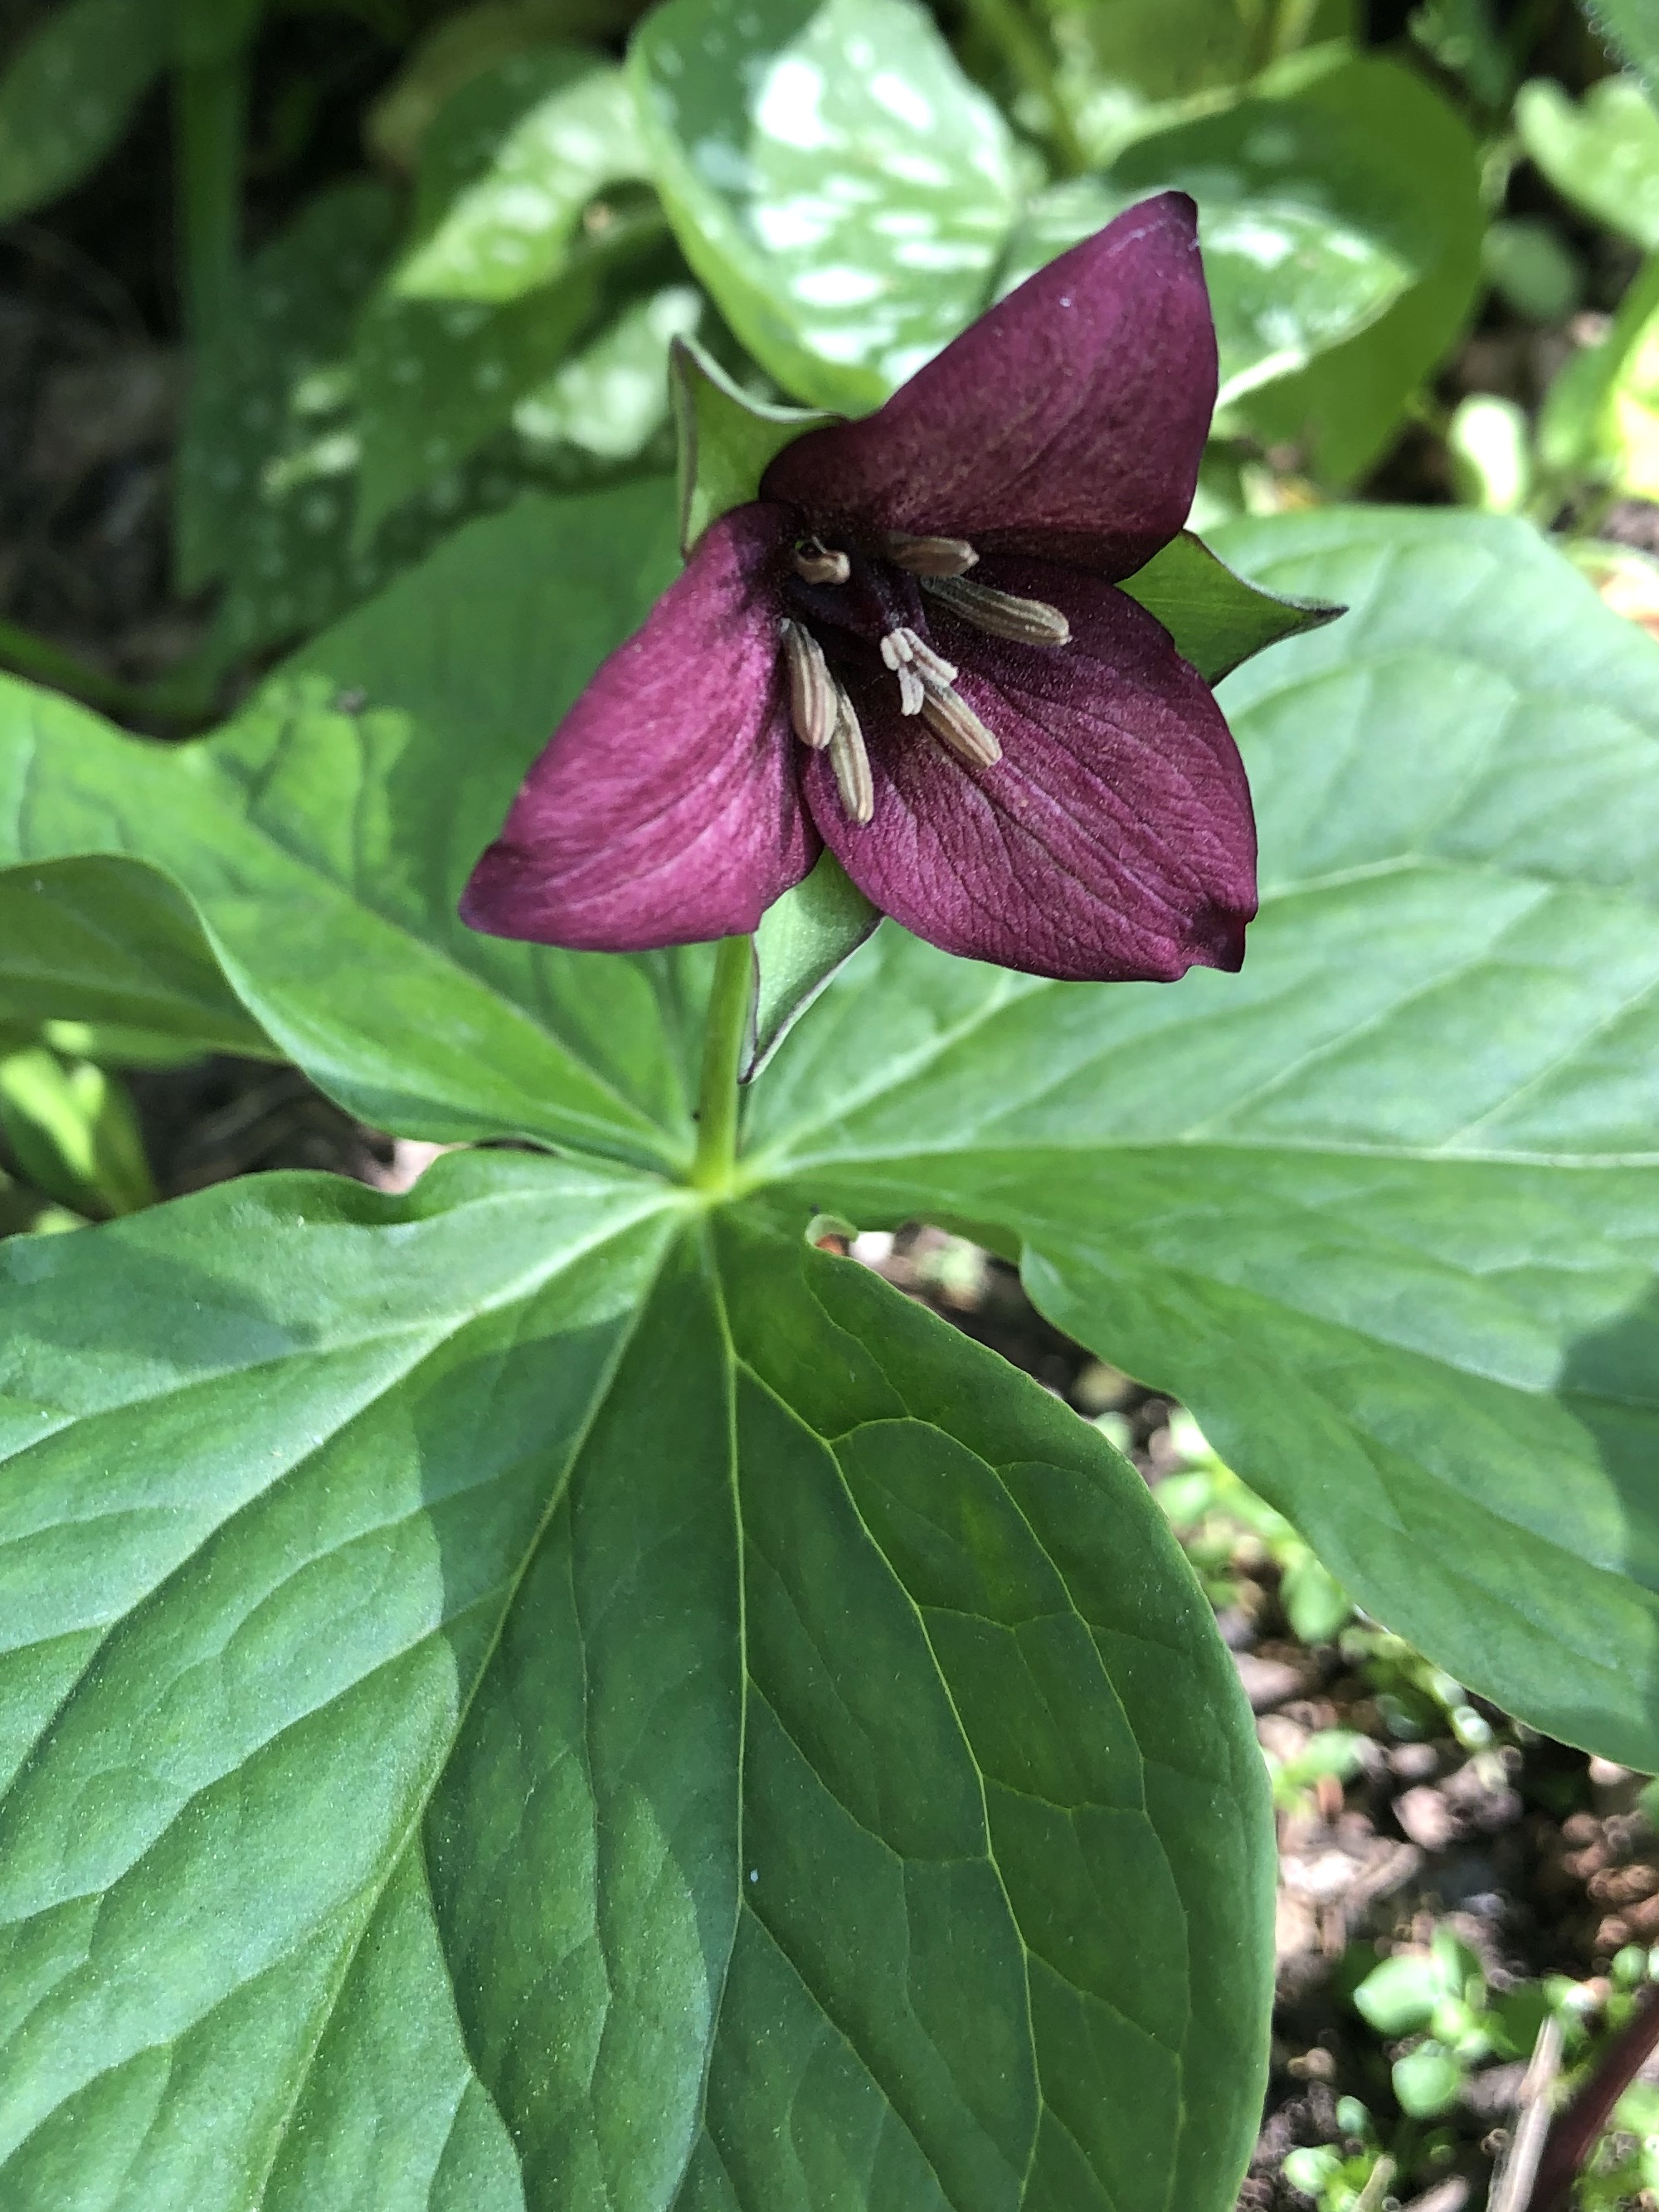 Red Trillium in Nakoma garden in Madison, Wisconsin on May 17, 2022.